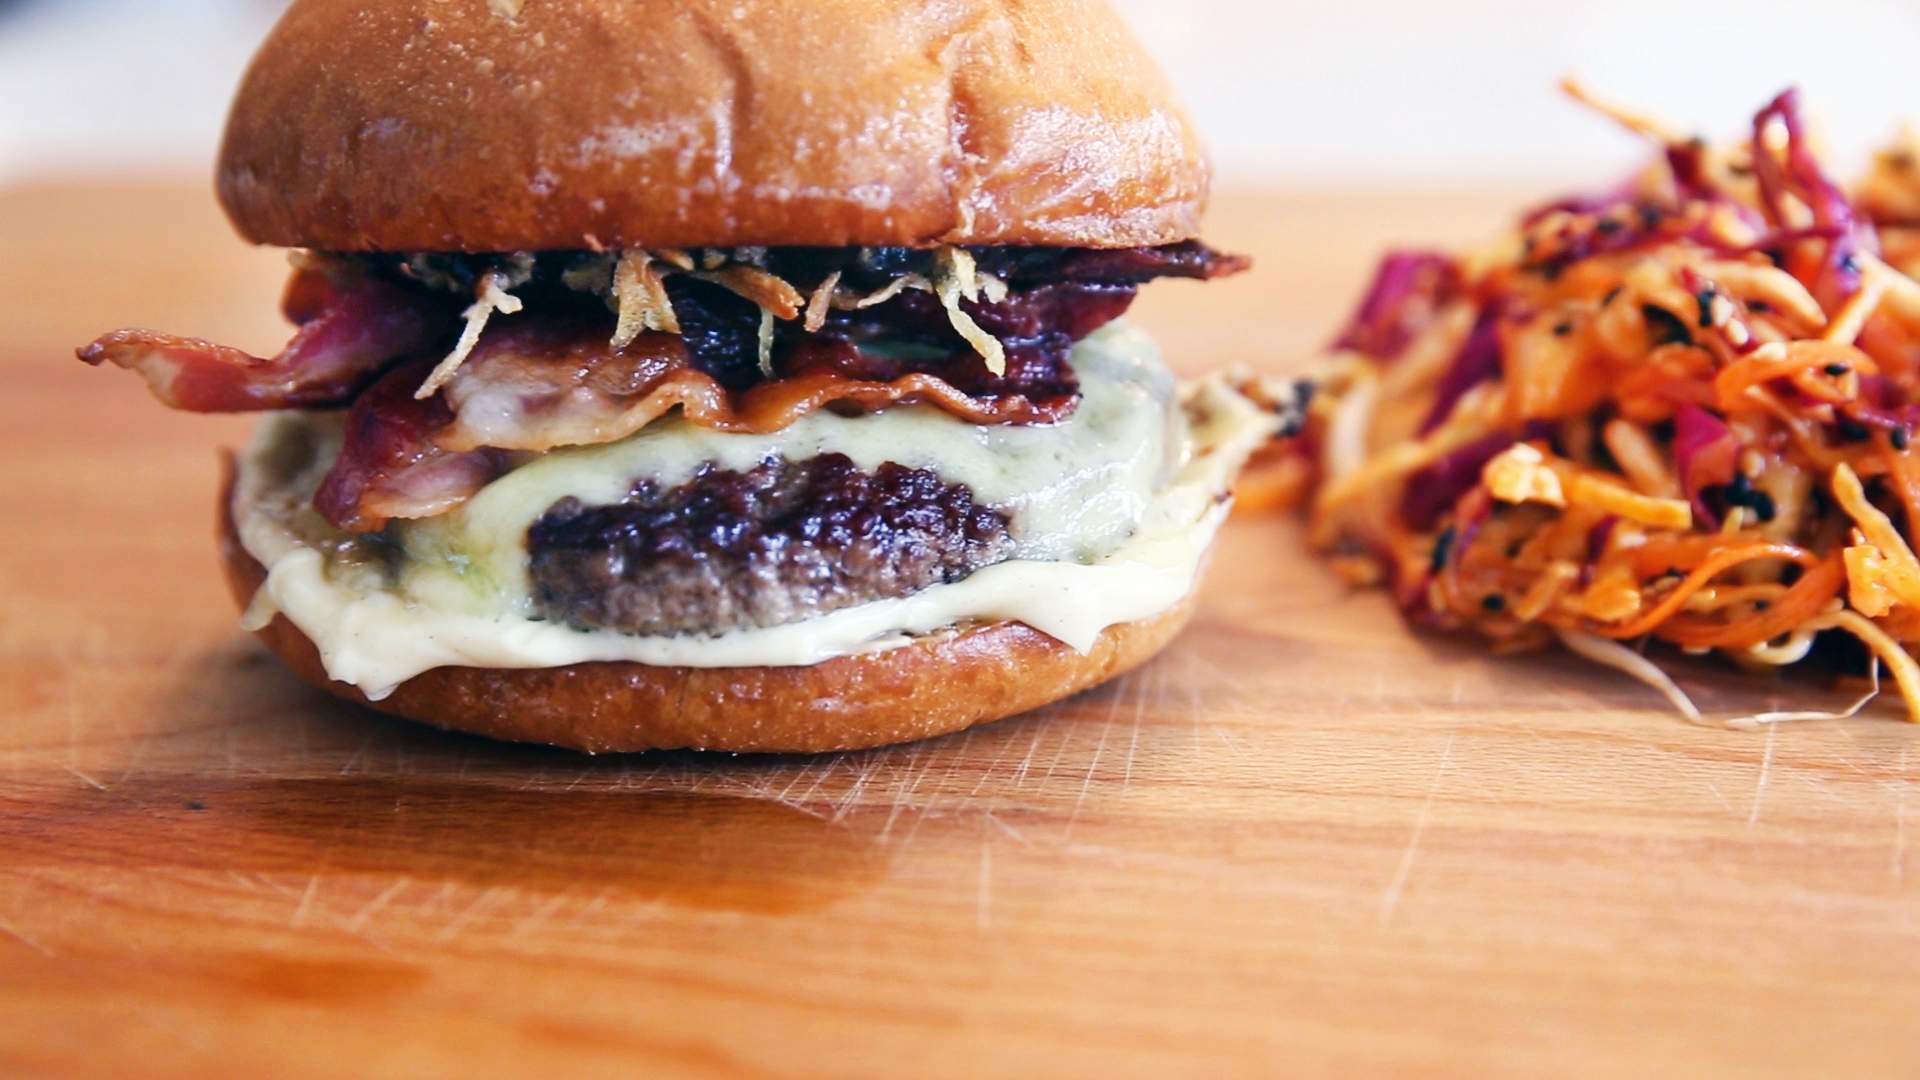 This New Service Lets You Cook Popular Auckland Street Food at Home